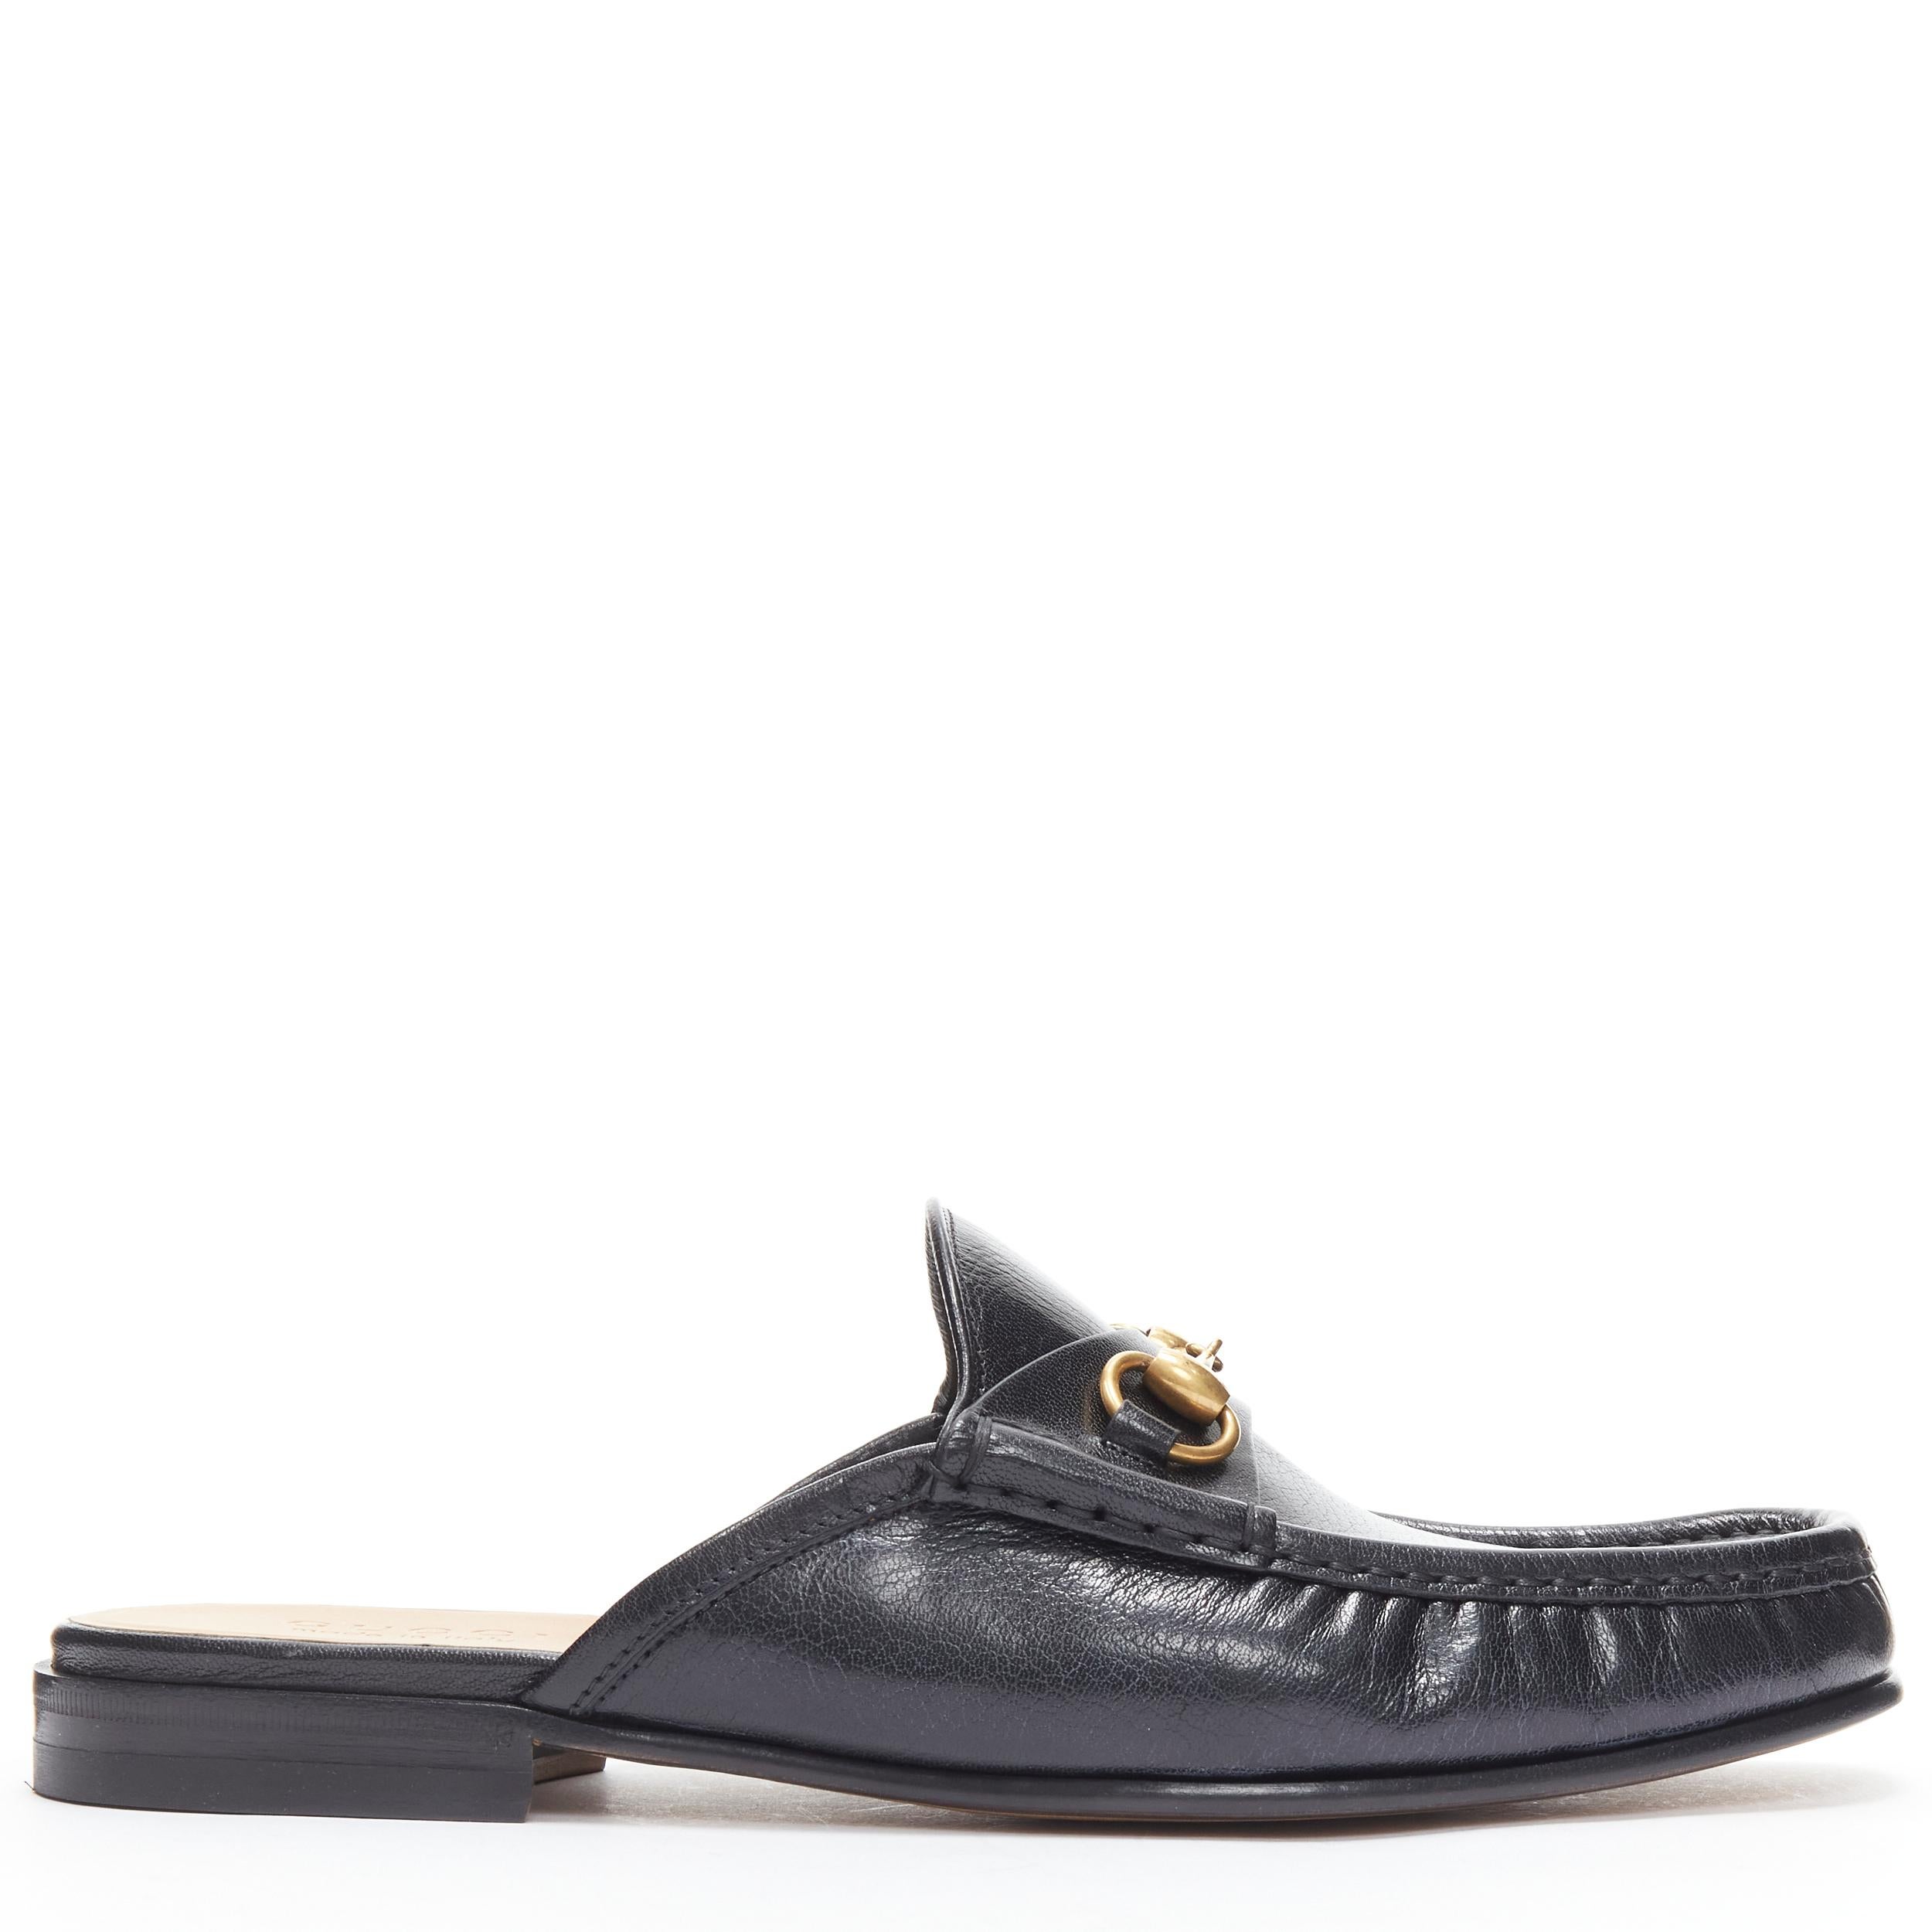 new GUCCI Quentin Nero black leather gold Horsebit slip on loafer UK8.5 US9.5 EU42.5 
Reference: TGAS/B02136 
Brand: Gucci 
Designer: Alessandro Michele 
Model: Quentin 
Material: Leather 
Color: Black 
Pattern: Solid 
Extra Detail: Quentin. Black